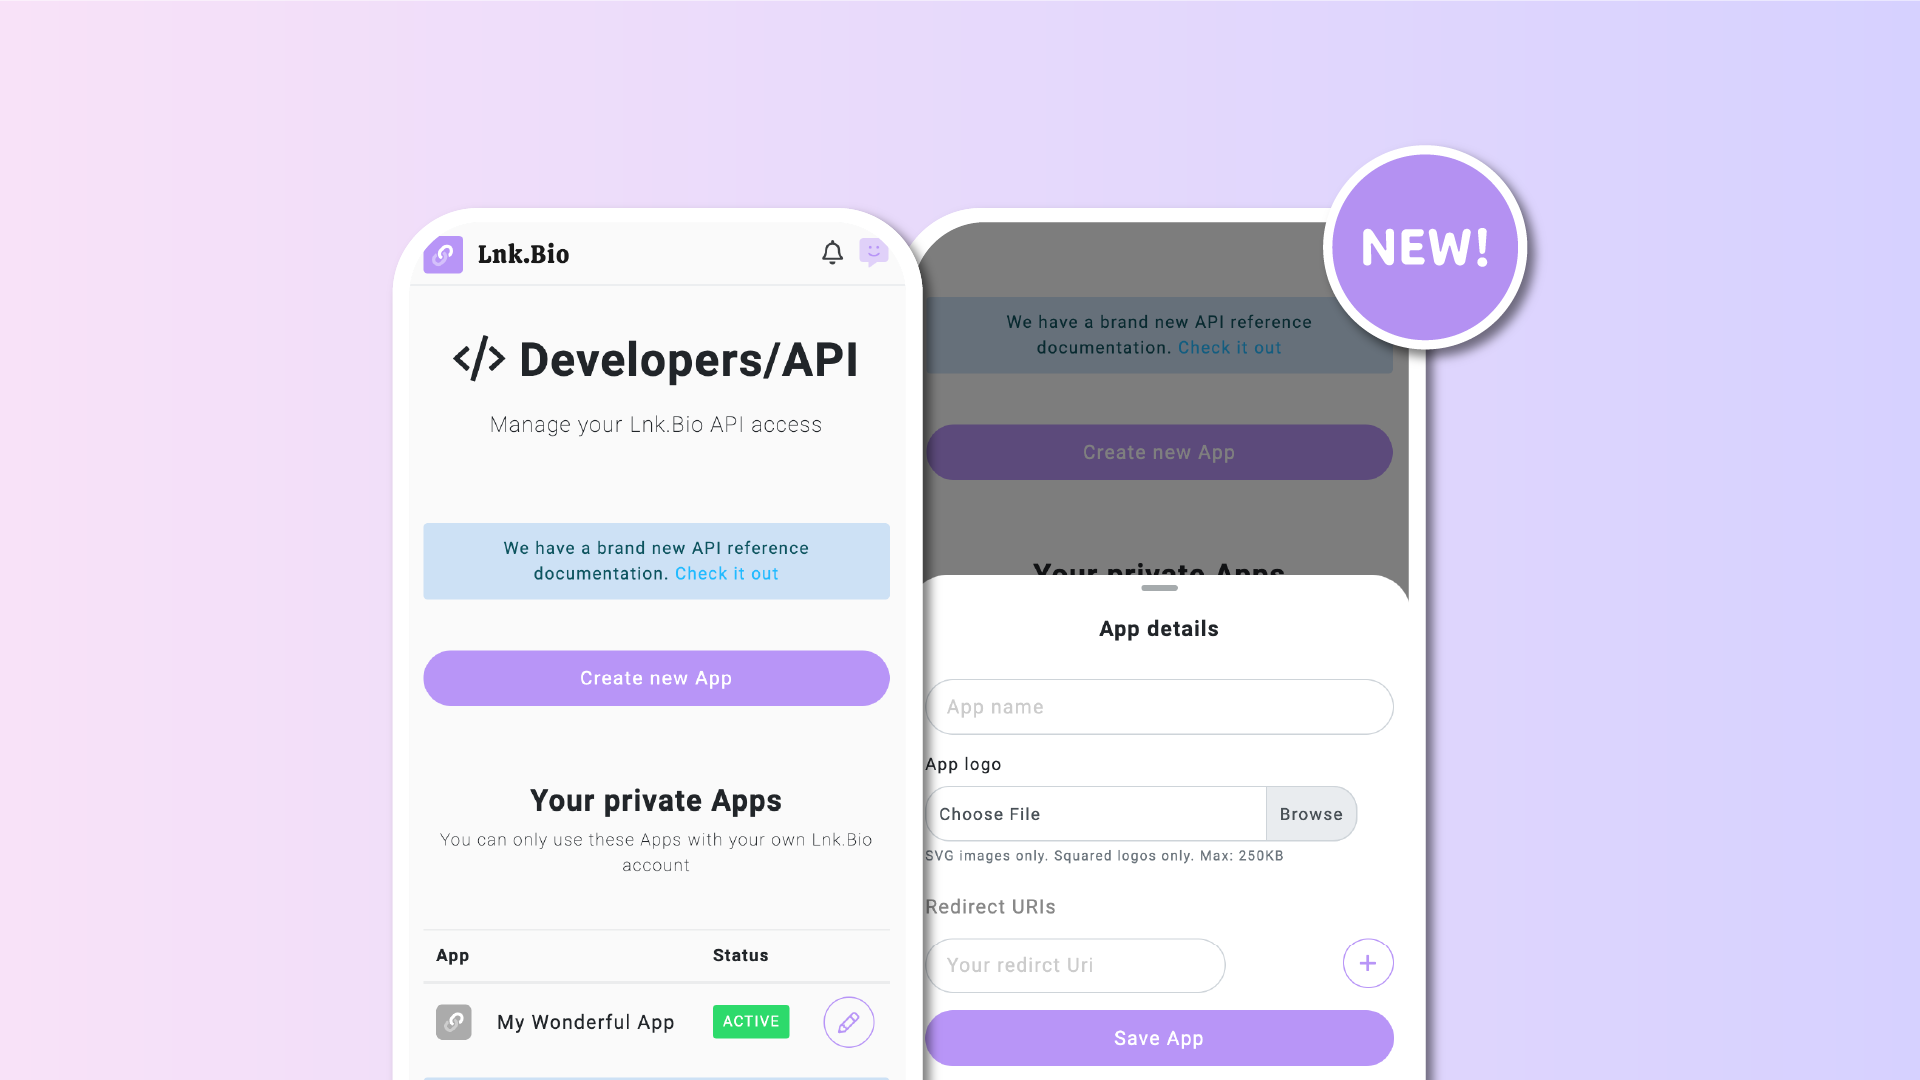 The Lnk.Bio APIs are now public for everyone